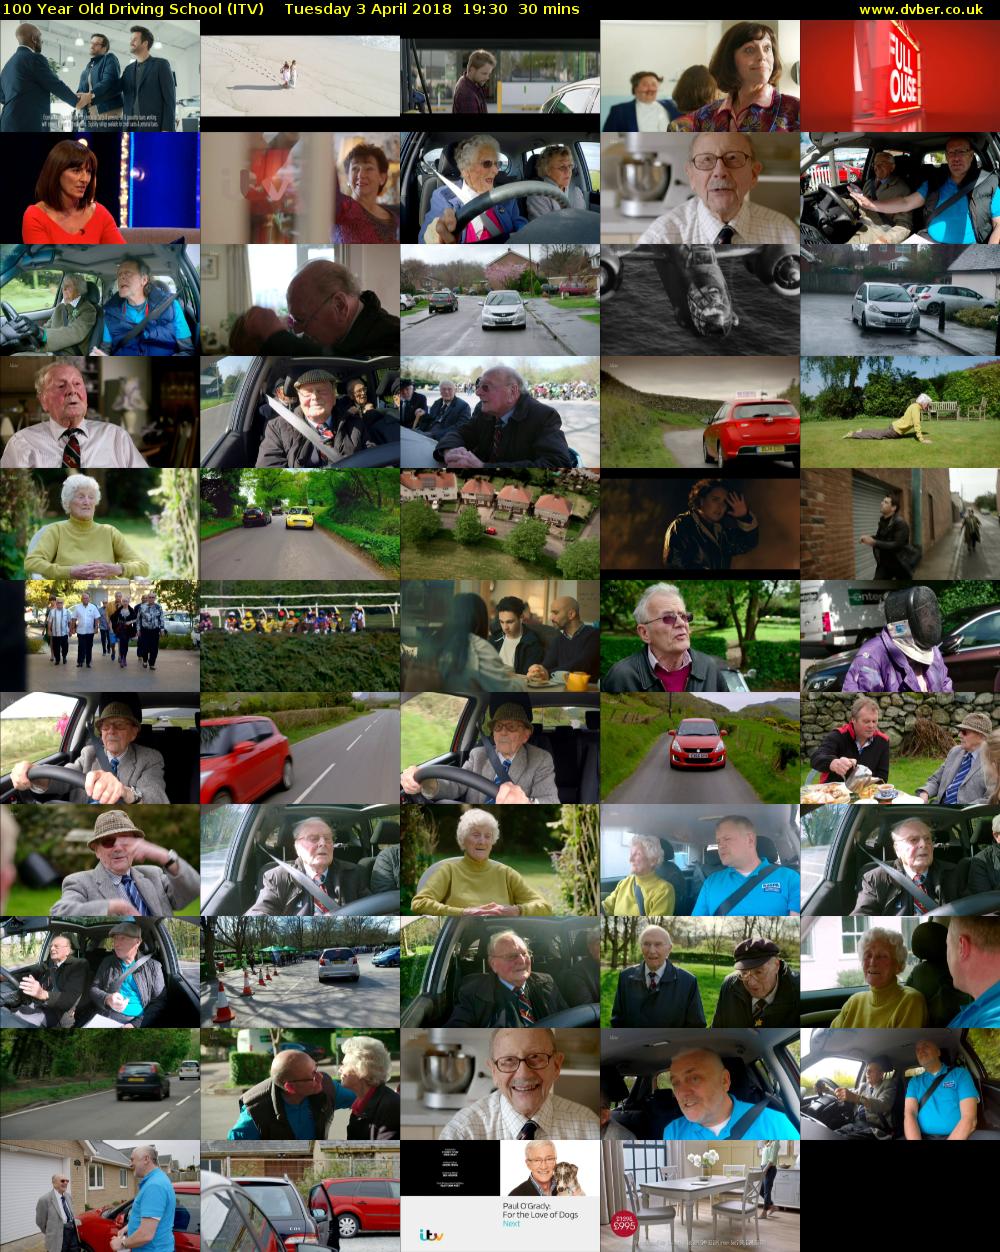 100 Year Old Driving School (ITV) Tuesday 3 April 2018 19:30 - 20:00